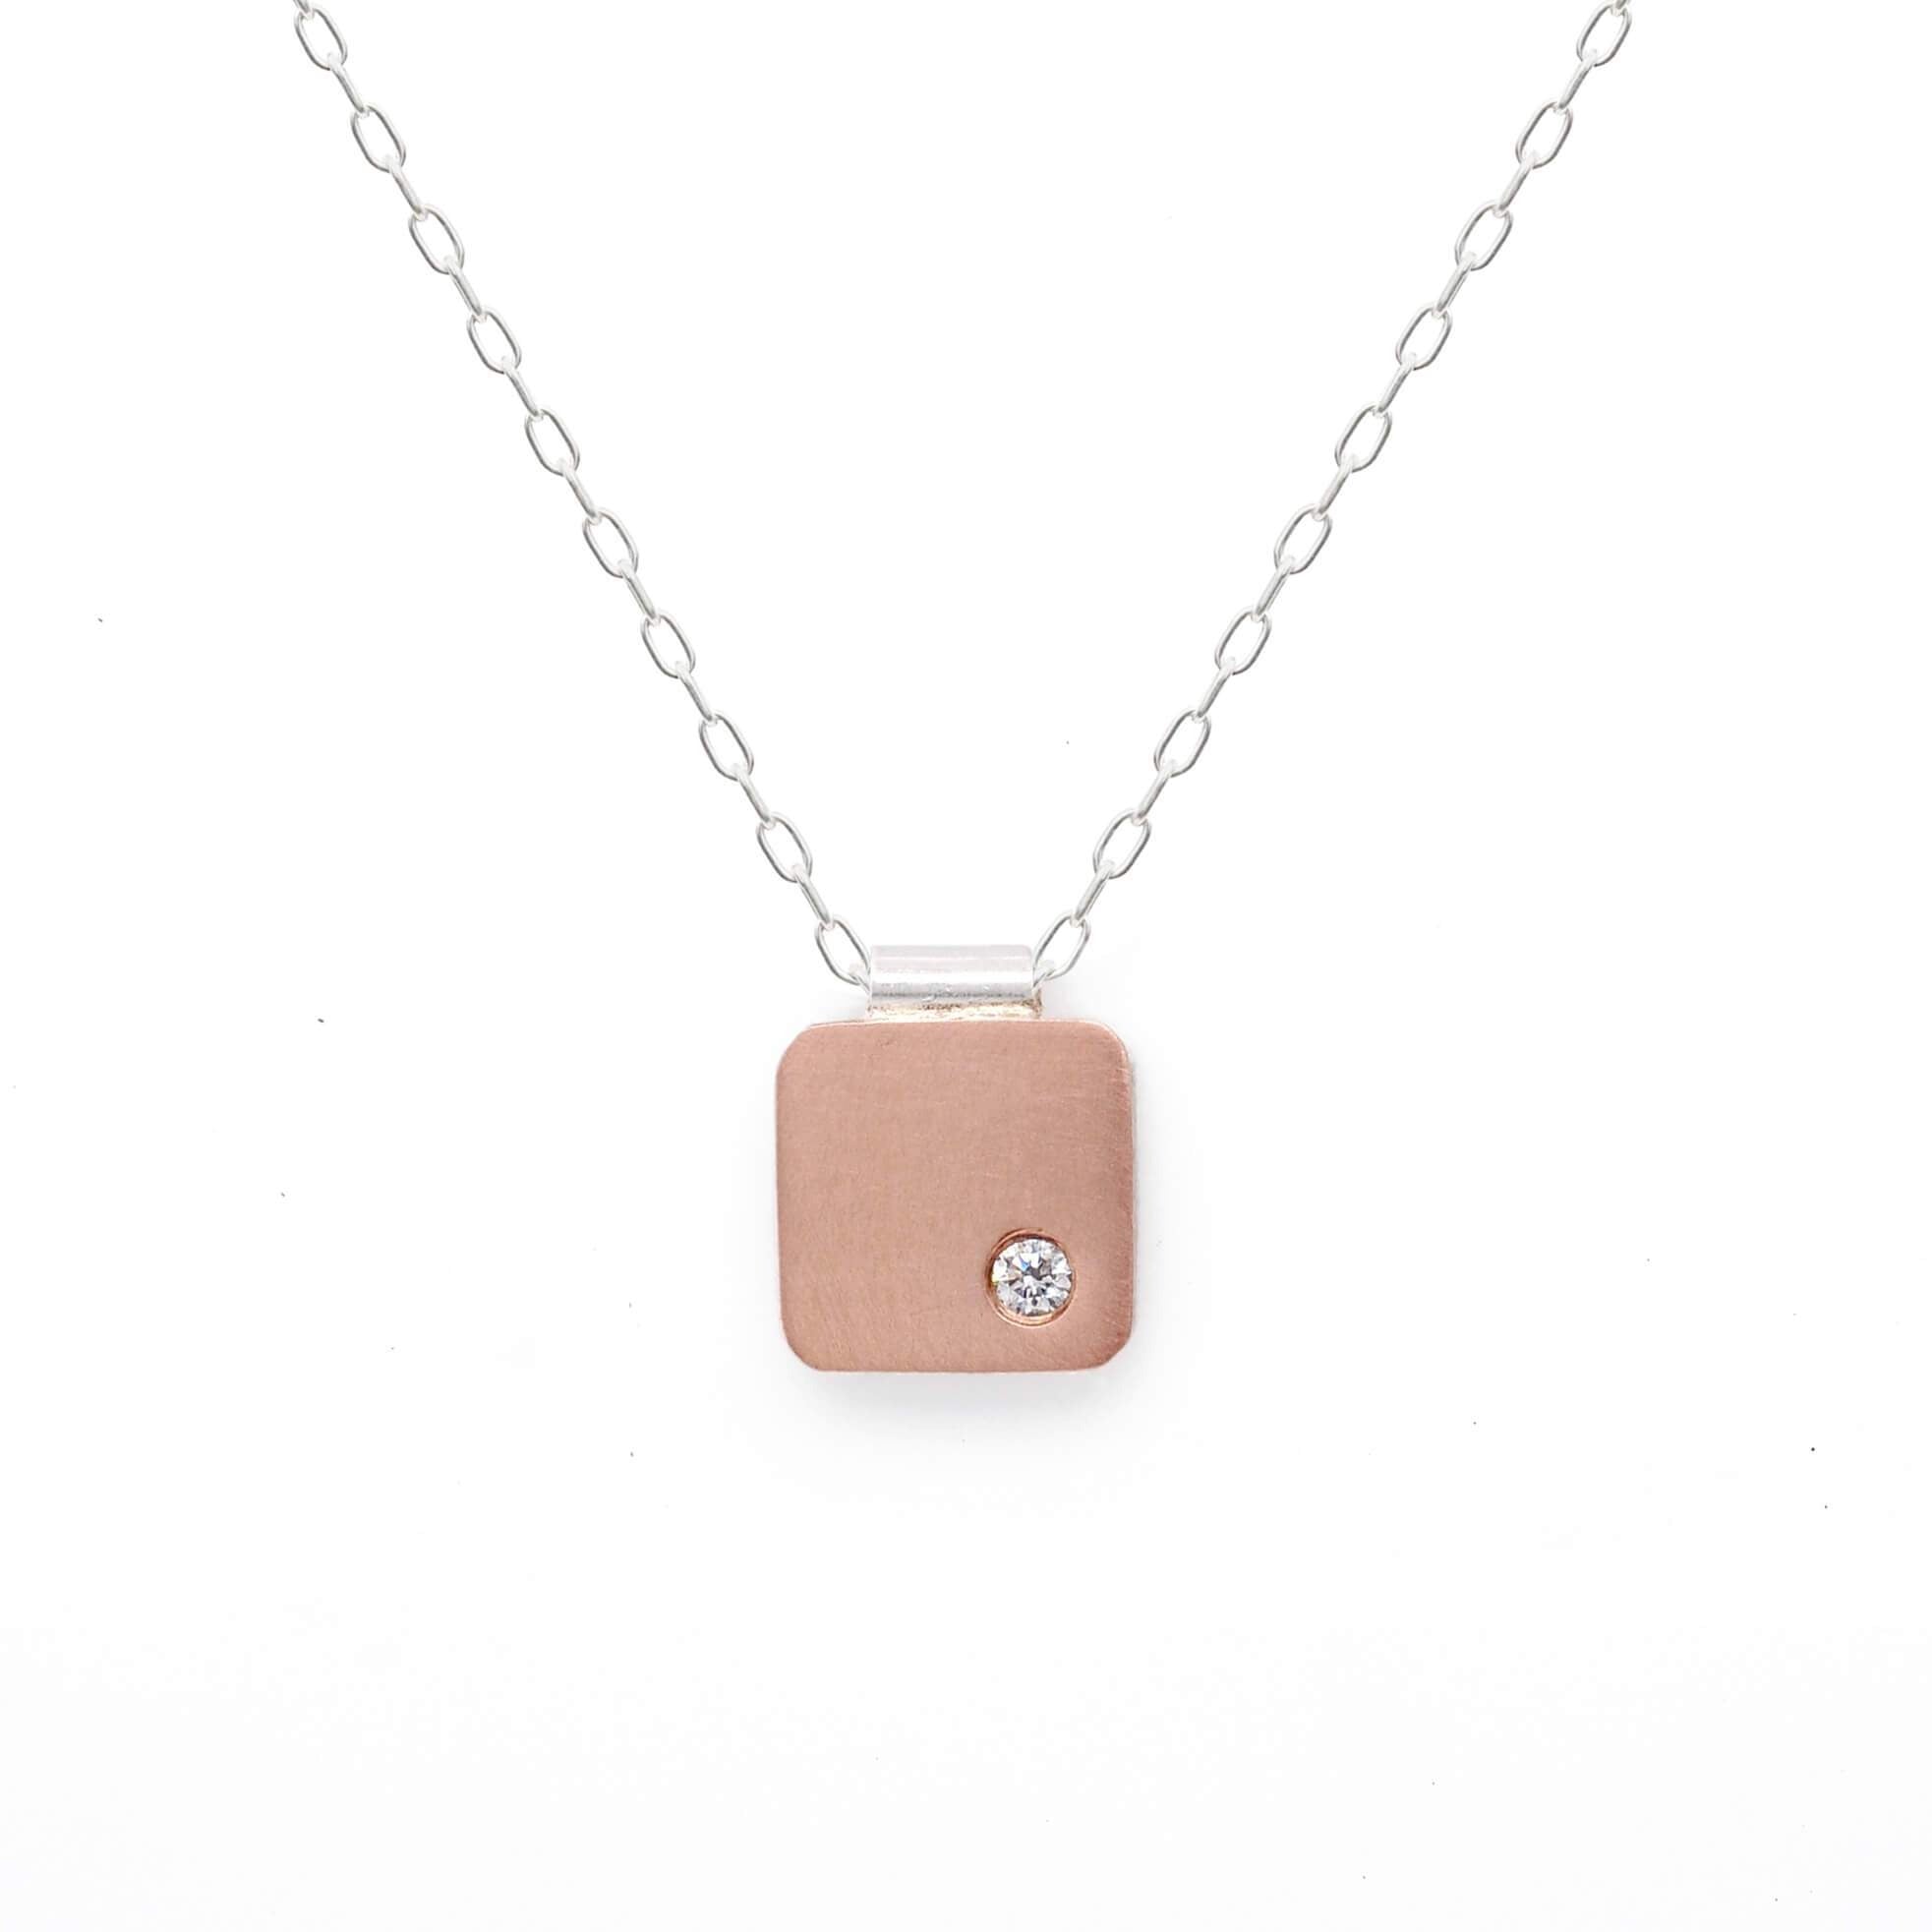 Handmade rose gold and diamond cell pendant. Made by EC Design Studio in Minneapolis, MN using recycled metal and conflict-free stone.